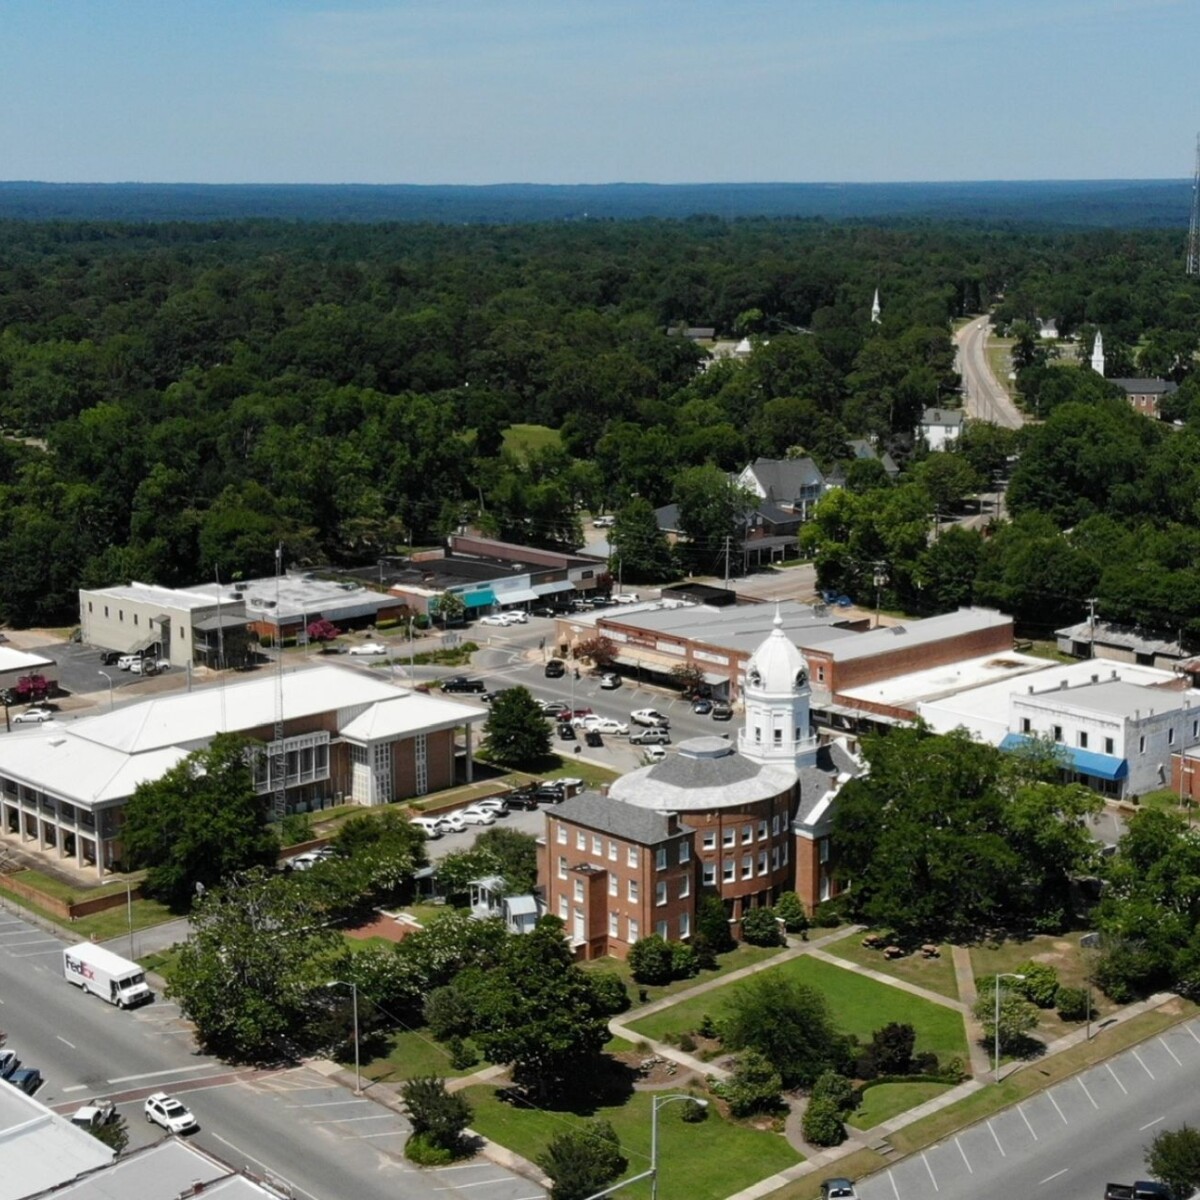 Aerial view of the Monroeville Courthouse Square.